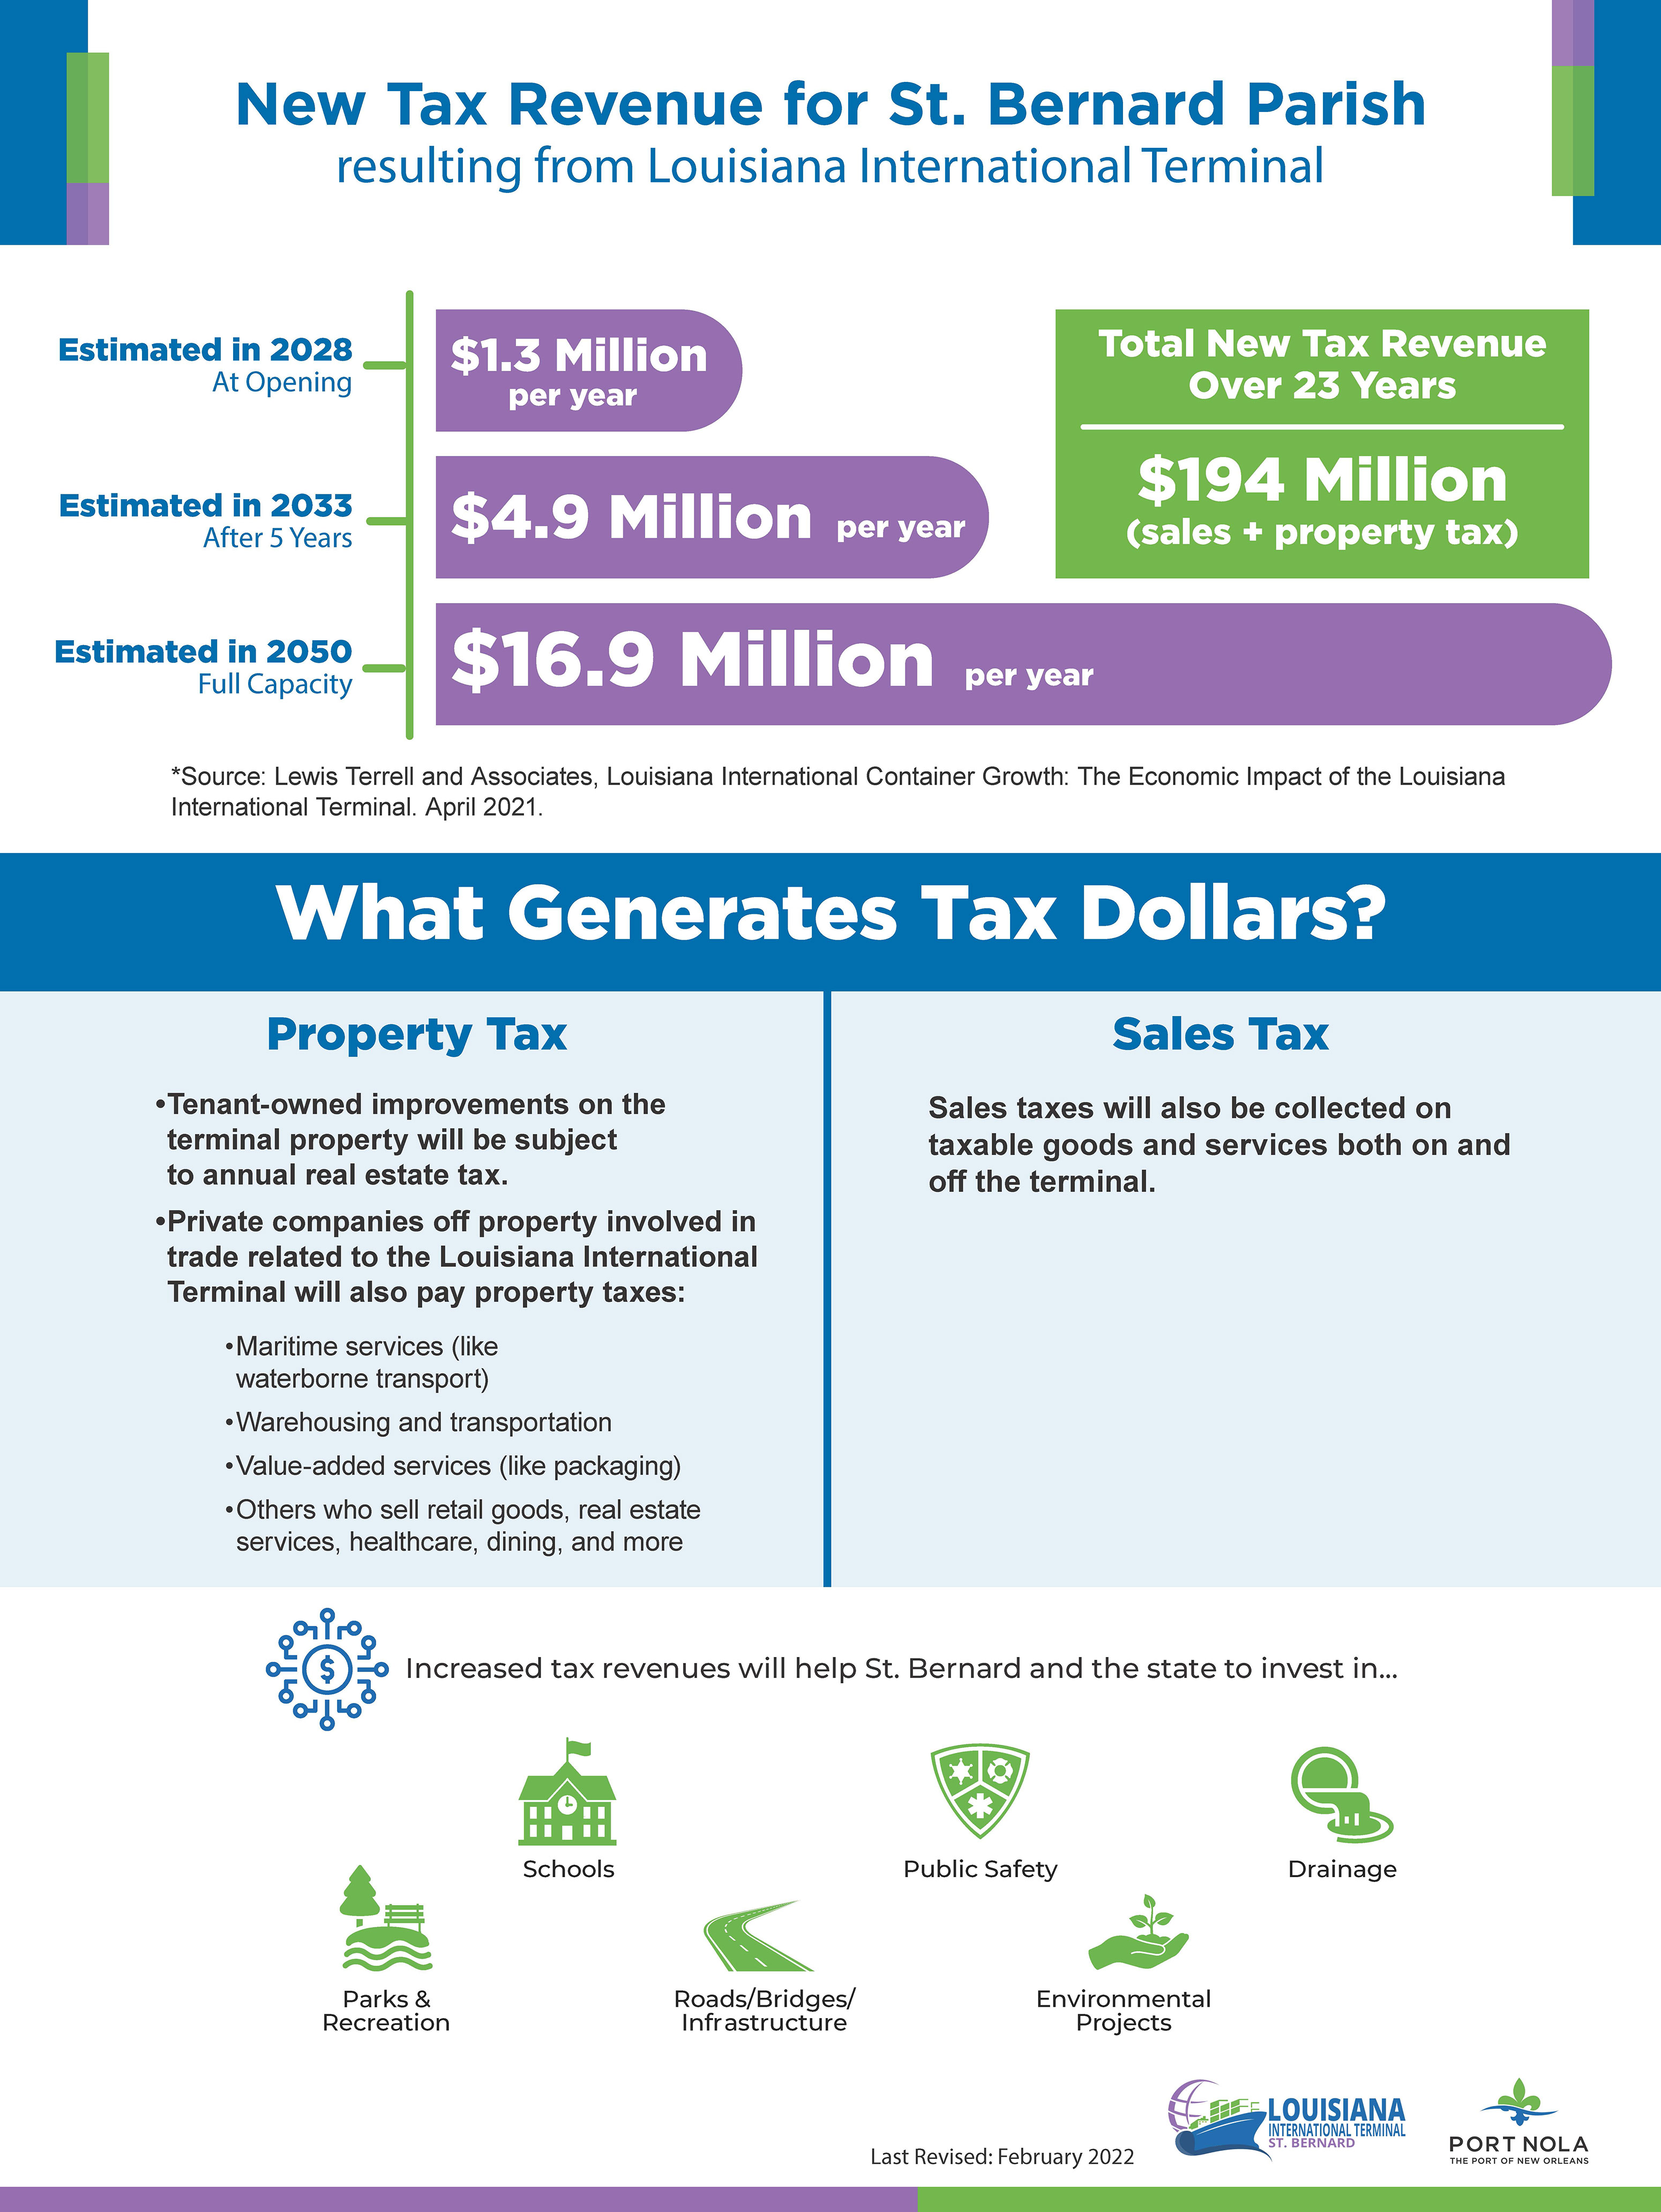 Graphic that depicts new tax revenue for St. Bernard Parish resulting from the terminal. The graphic shows an estimated $1.3 million per year in 2028 growing to $16.9 million per year in 2050. It also explains what generates taxes, such as property taxes from private companies off terminal and tenant-owned improvements as well as sales tax on taxable goods and services on and off the terminal. Lastly, the graphic shows how those tax dollars can be used to improve quality of life in the community through investment in schools, public safety, drainage, infrastructure, recreation and environmental projects.